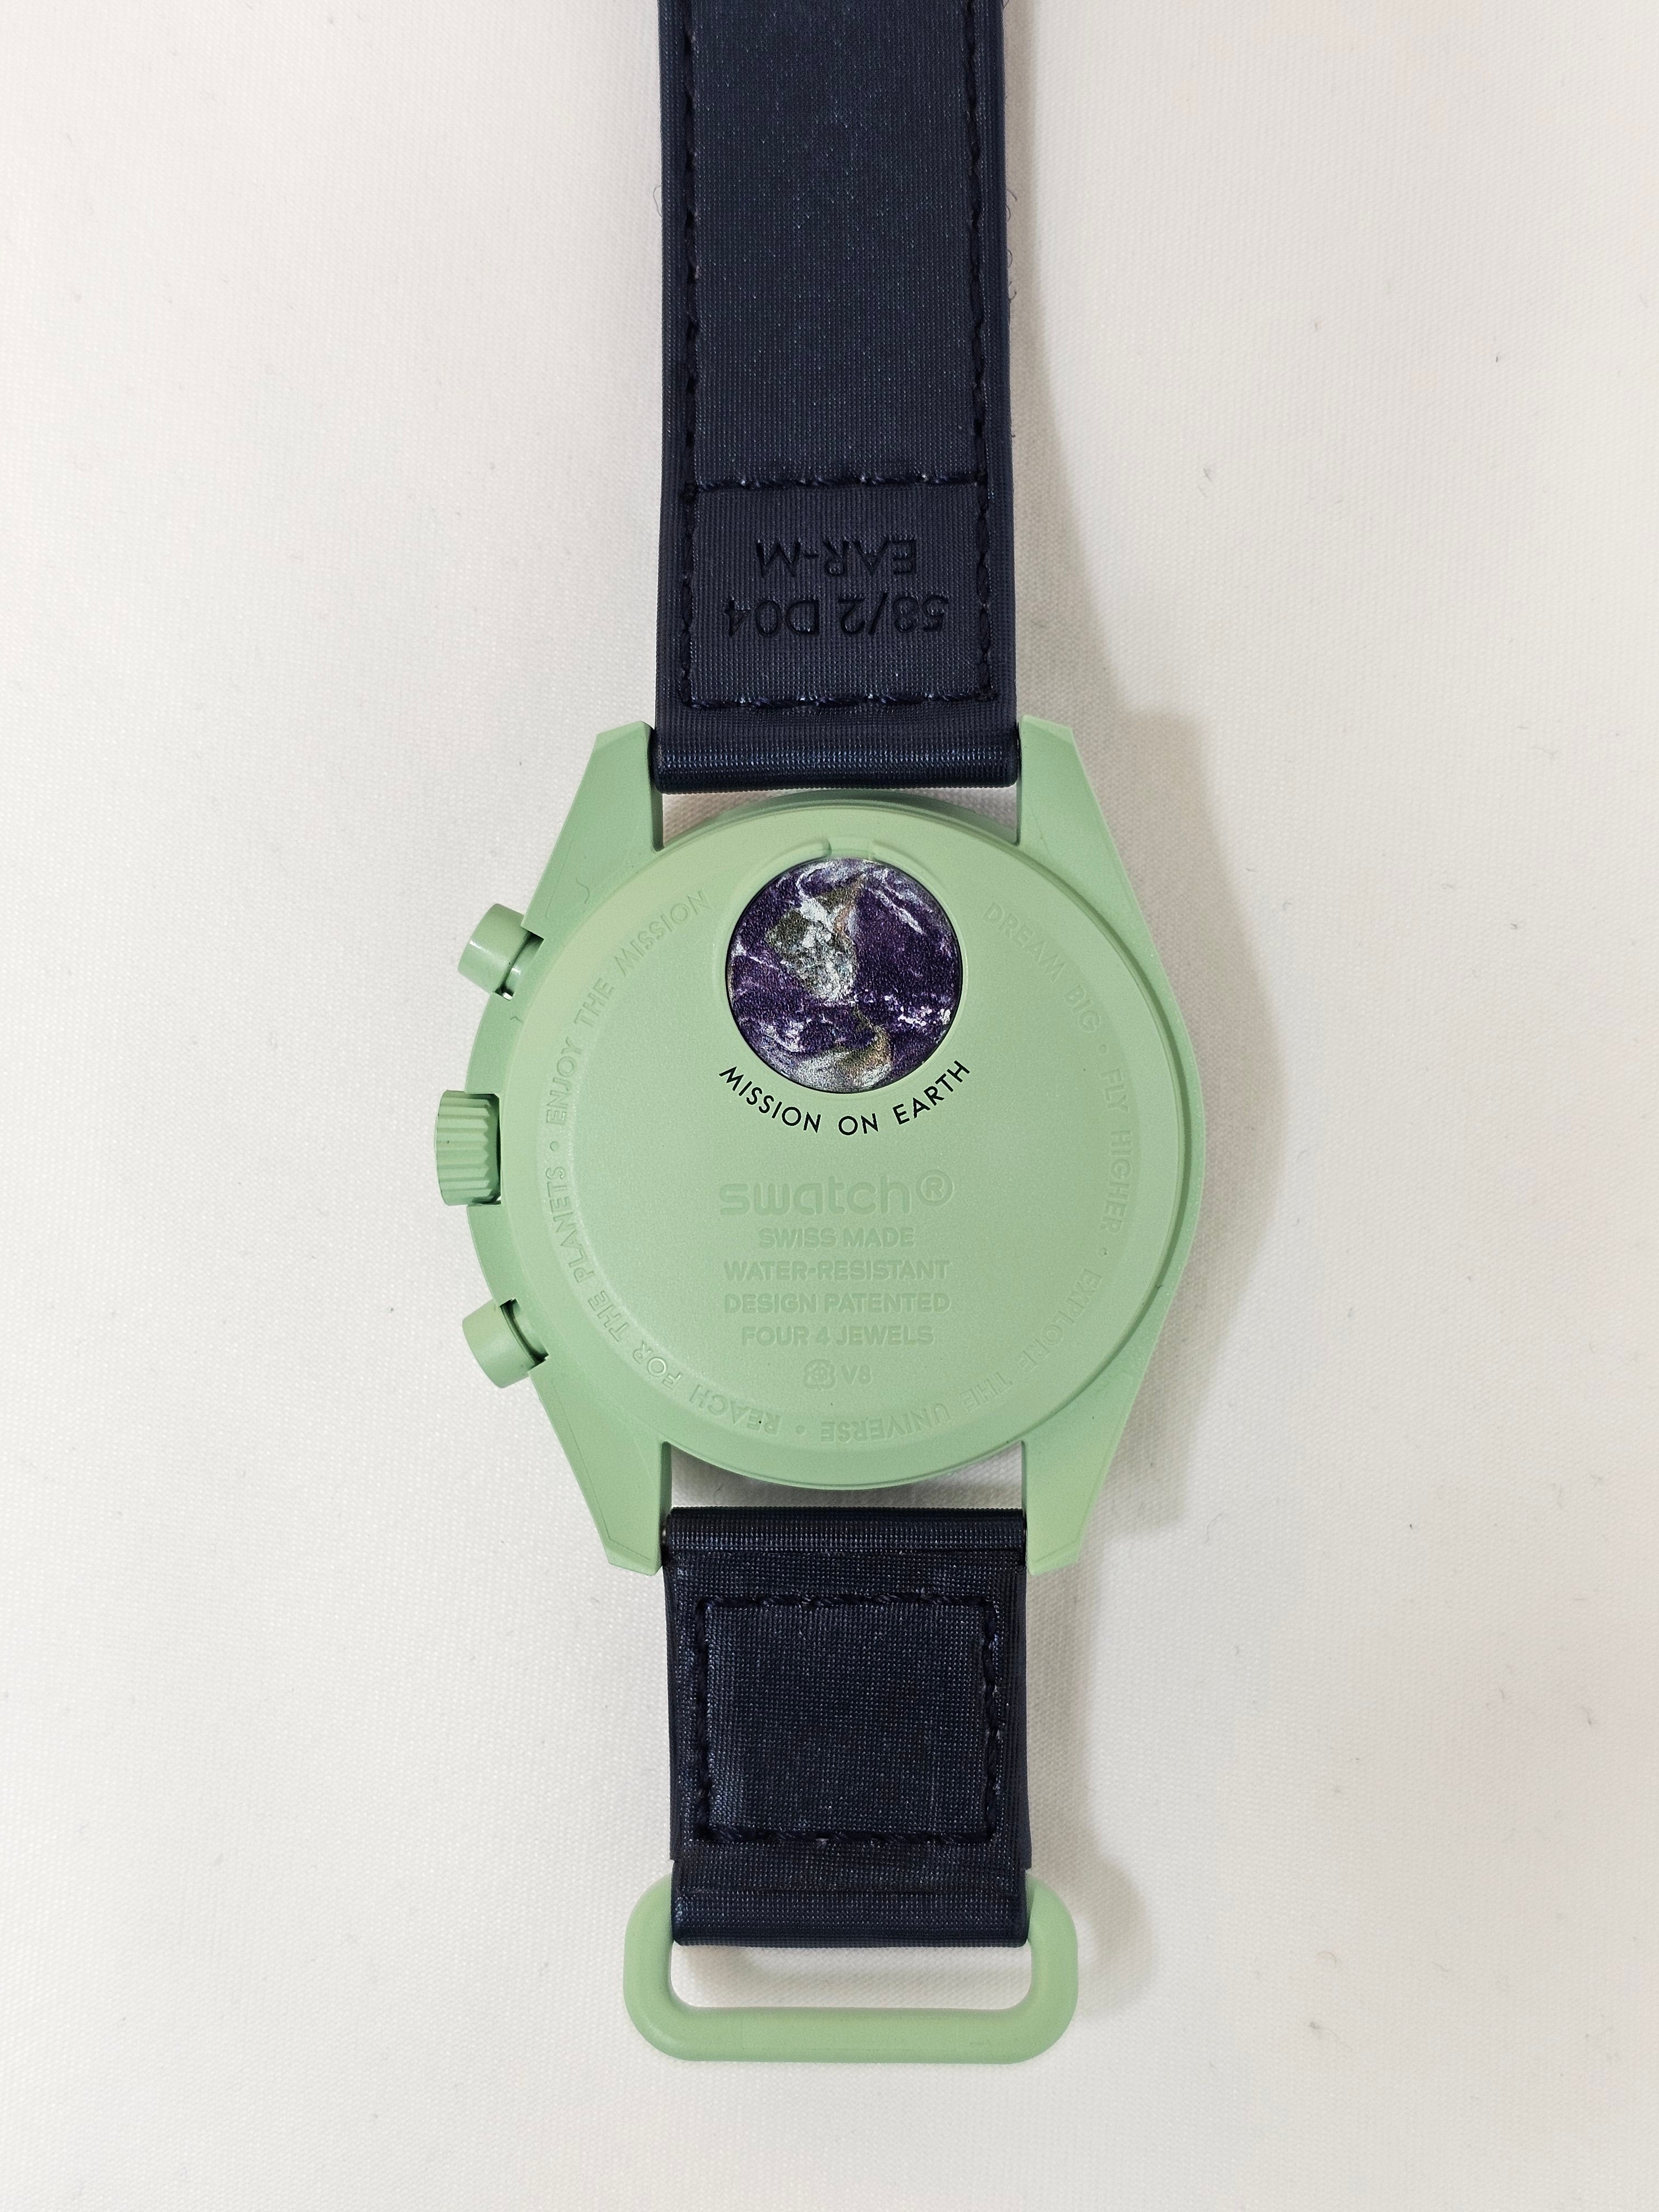 Swatch Moonswatch - Mission on Earth: Embrace Time with a Cosmic 